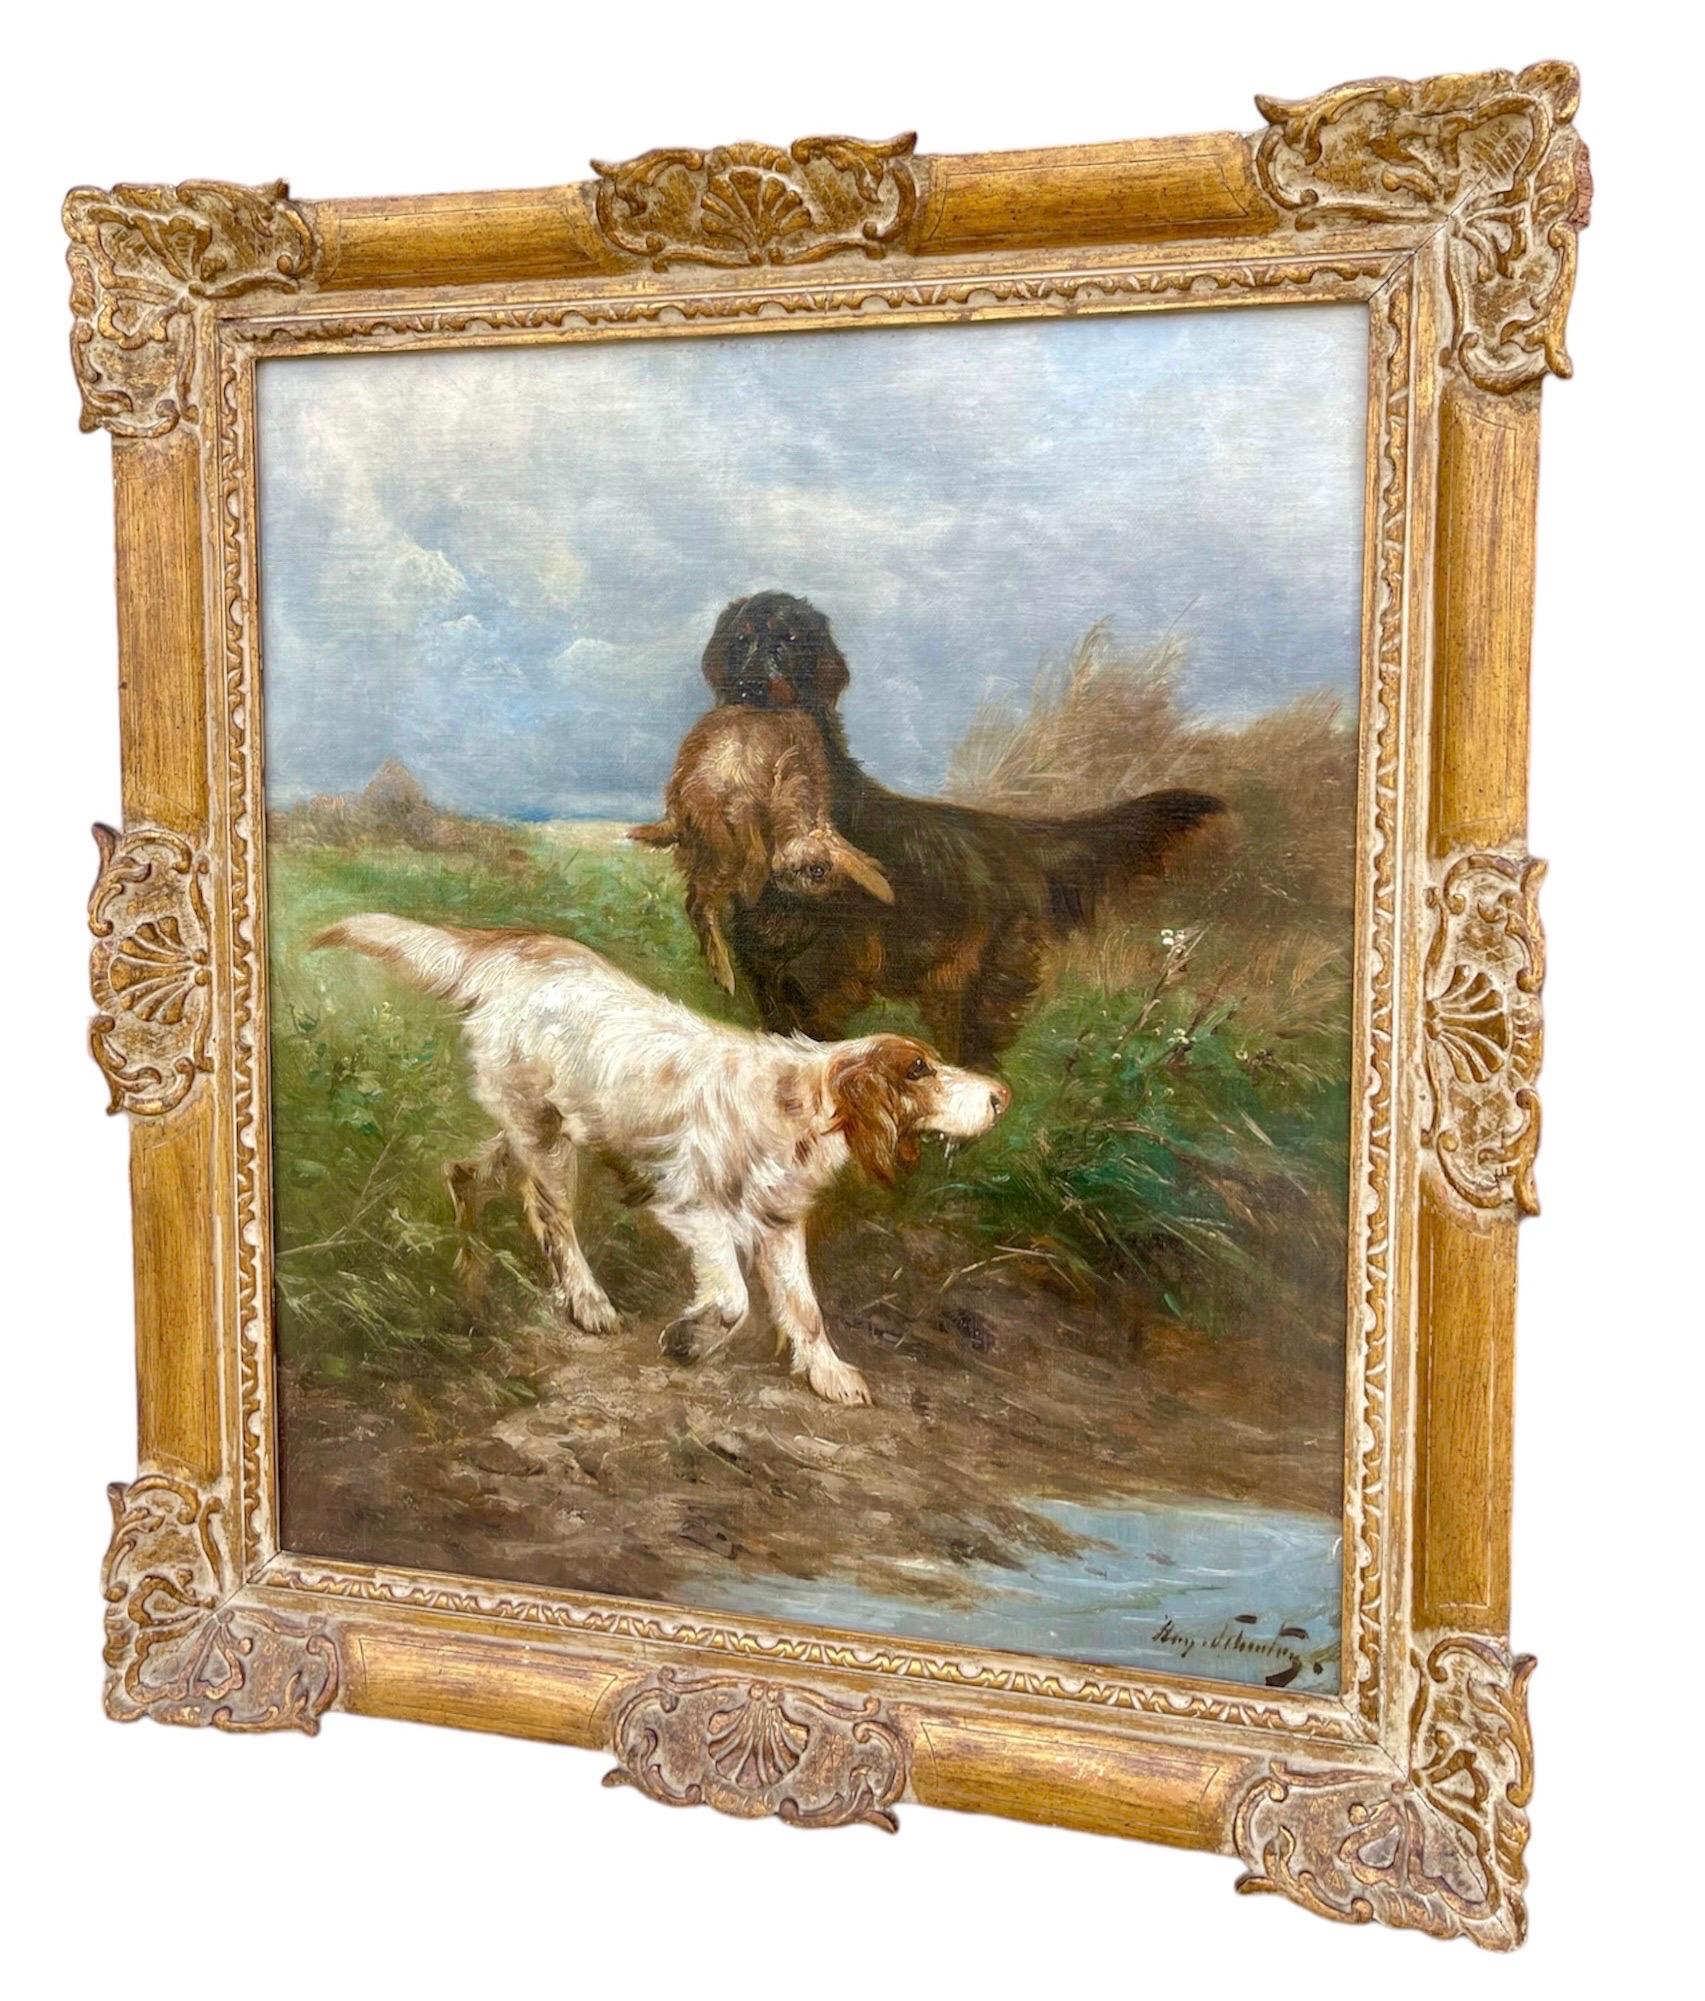 19th century Hunting scene - Setter dogs with their prey in a landscape - Hunt  6